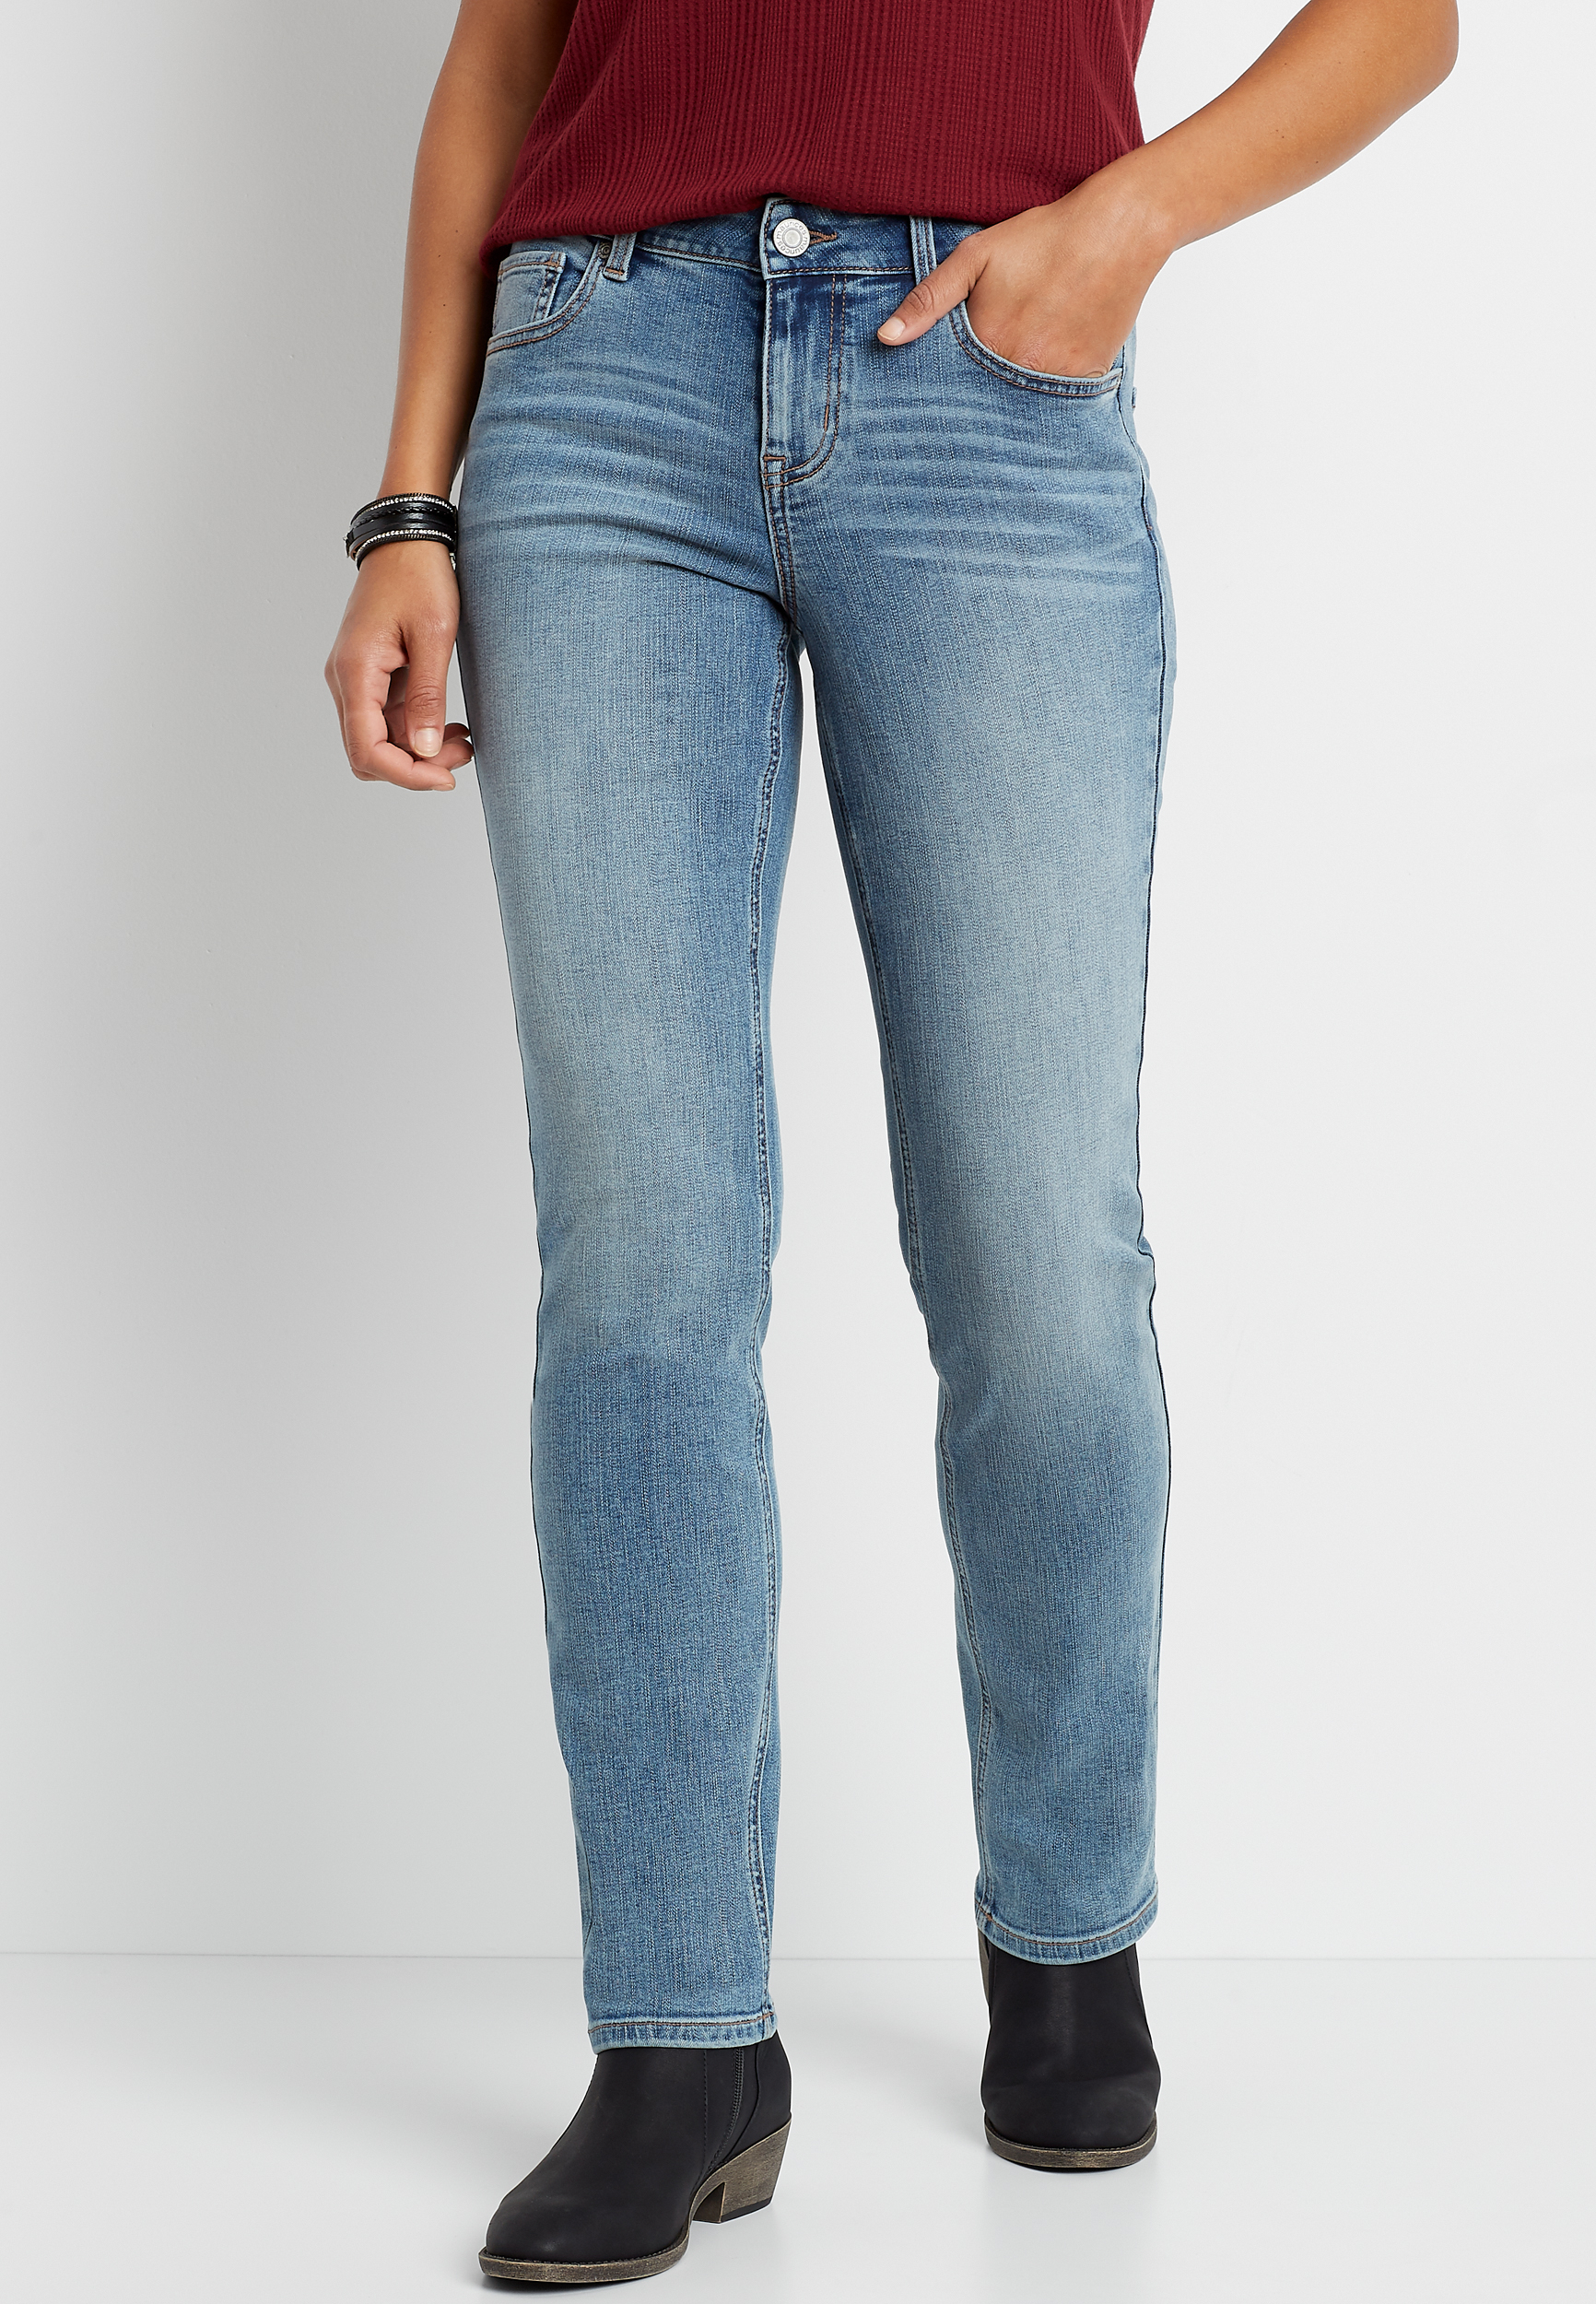 m jeans by maurices™ Classic Straight Mid Rise Jean | maurices